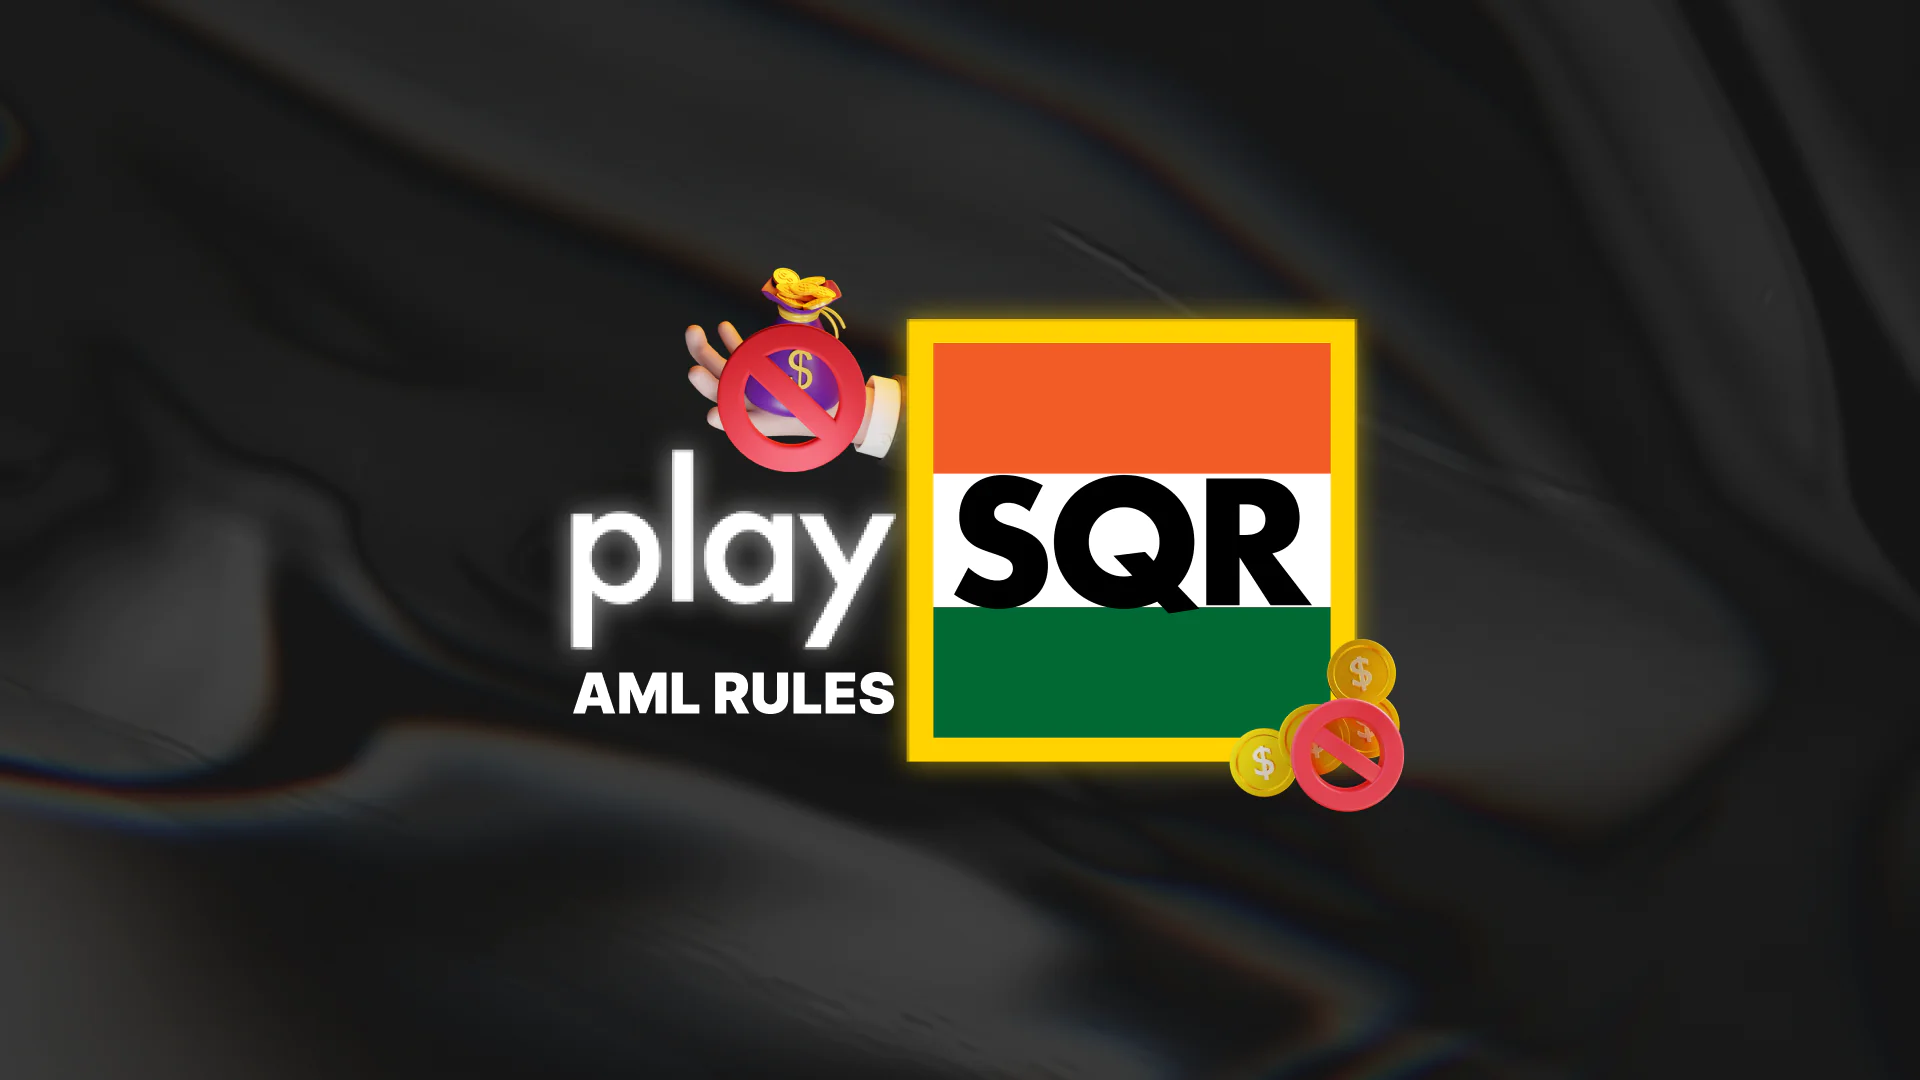 Learn more Information about PlaySQR AML Rules